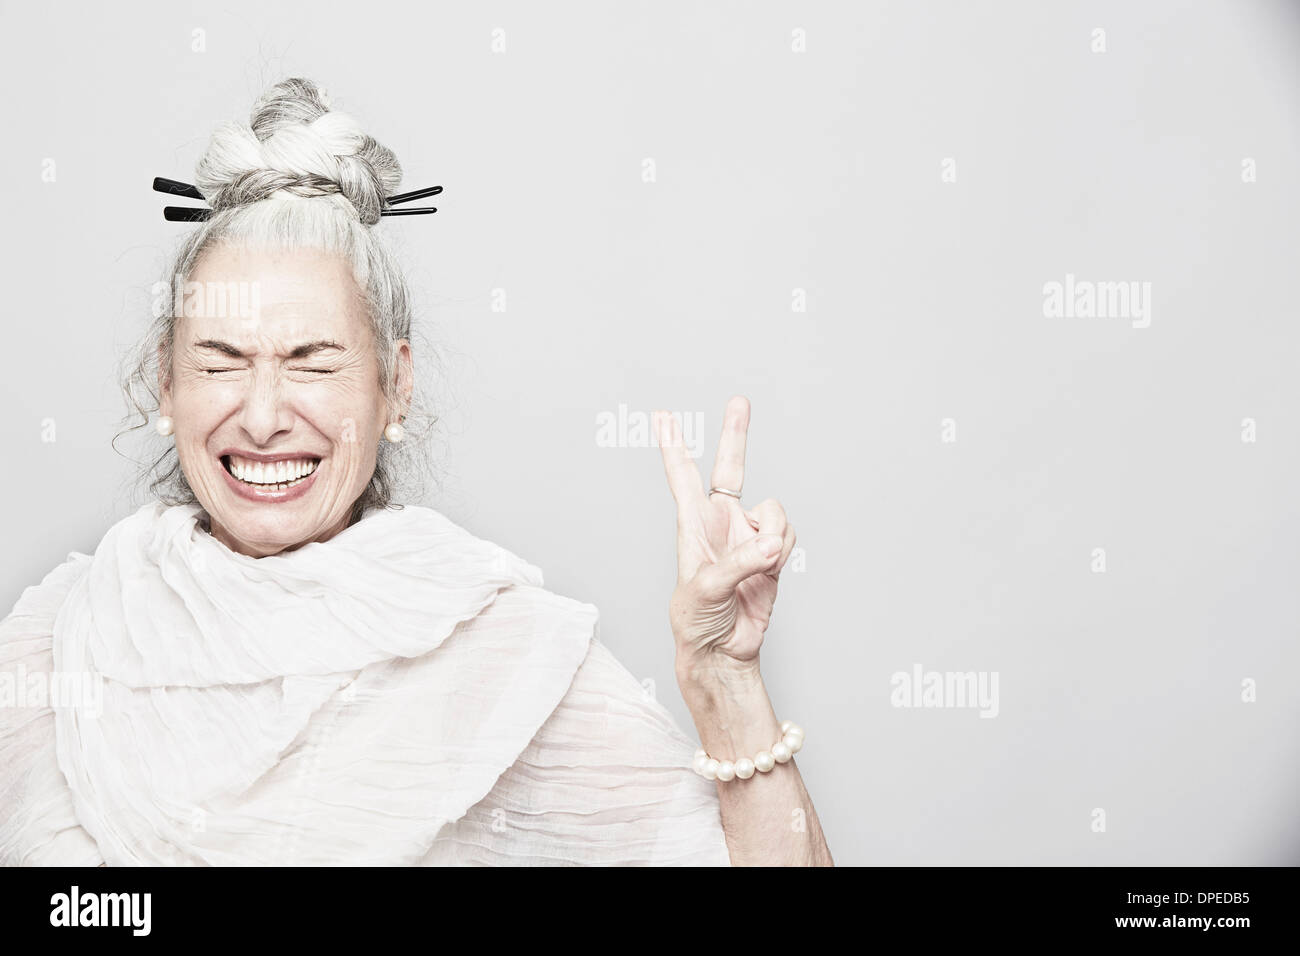 Studio portrait of sophisticated senior woman making victory sign Stock Photo